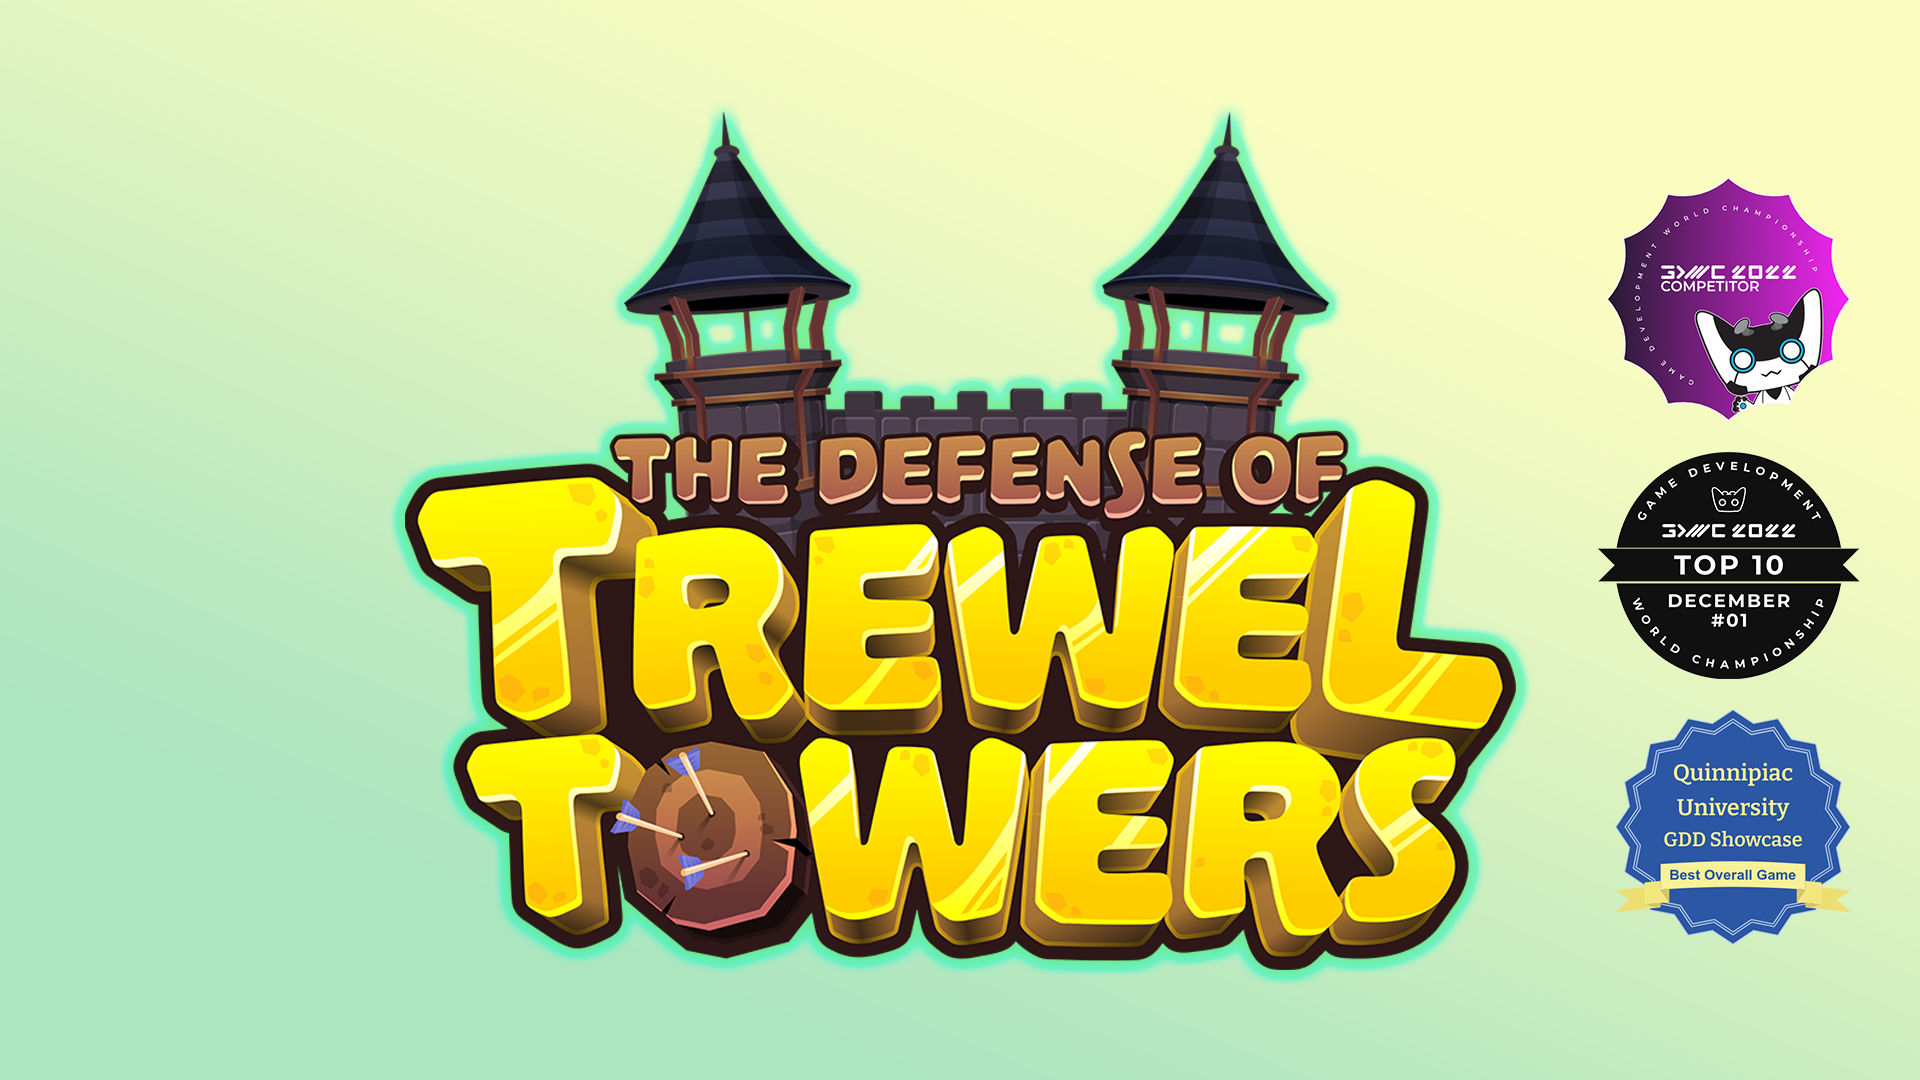 The Defense of Trewel Towers - Trewel Towers - GDWC - The Game Development  World Championship